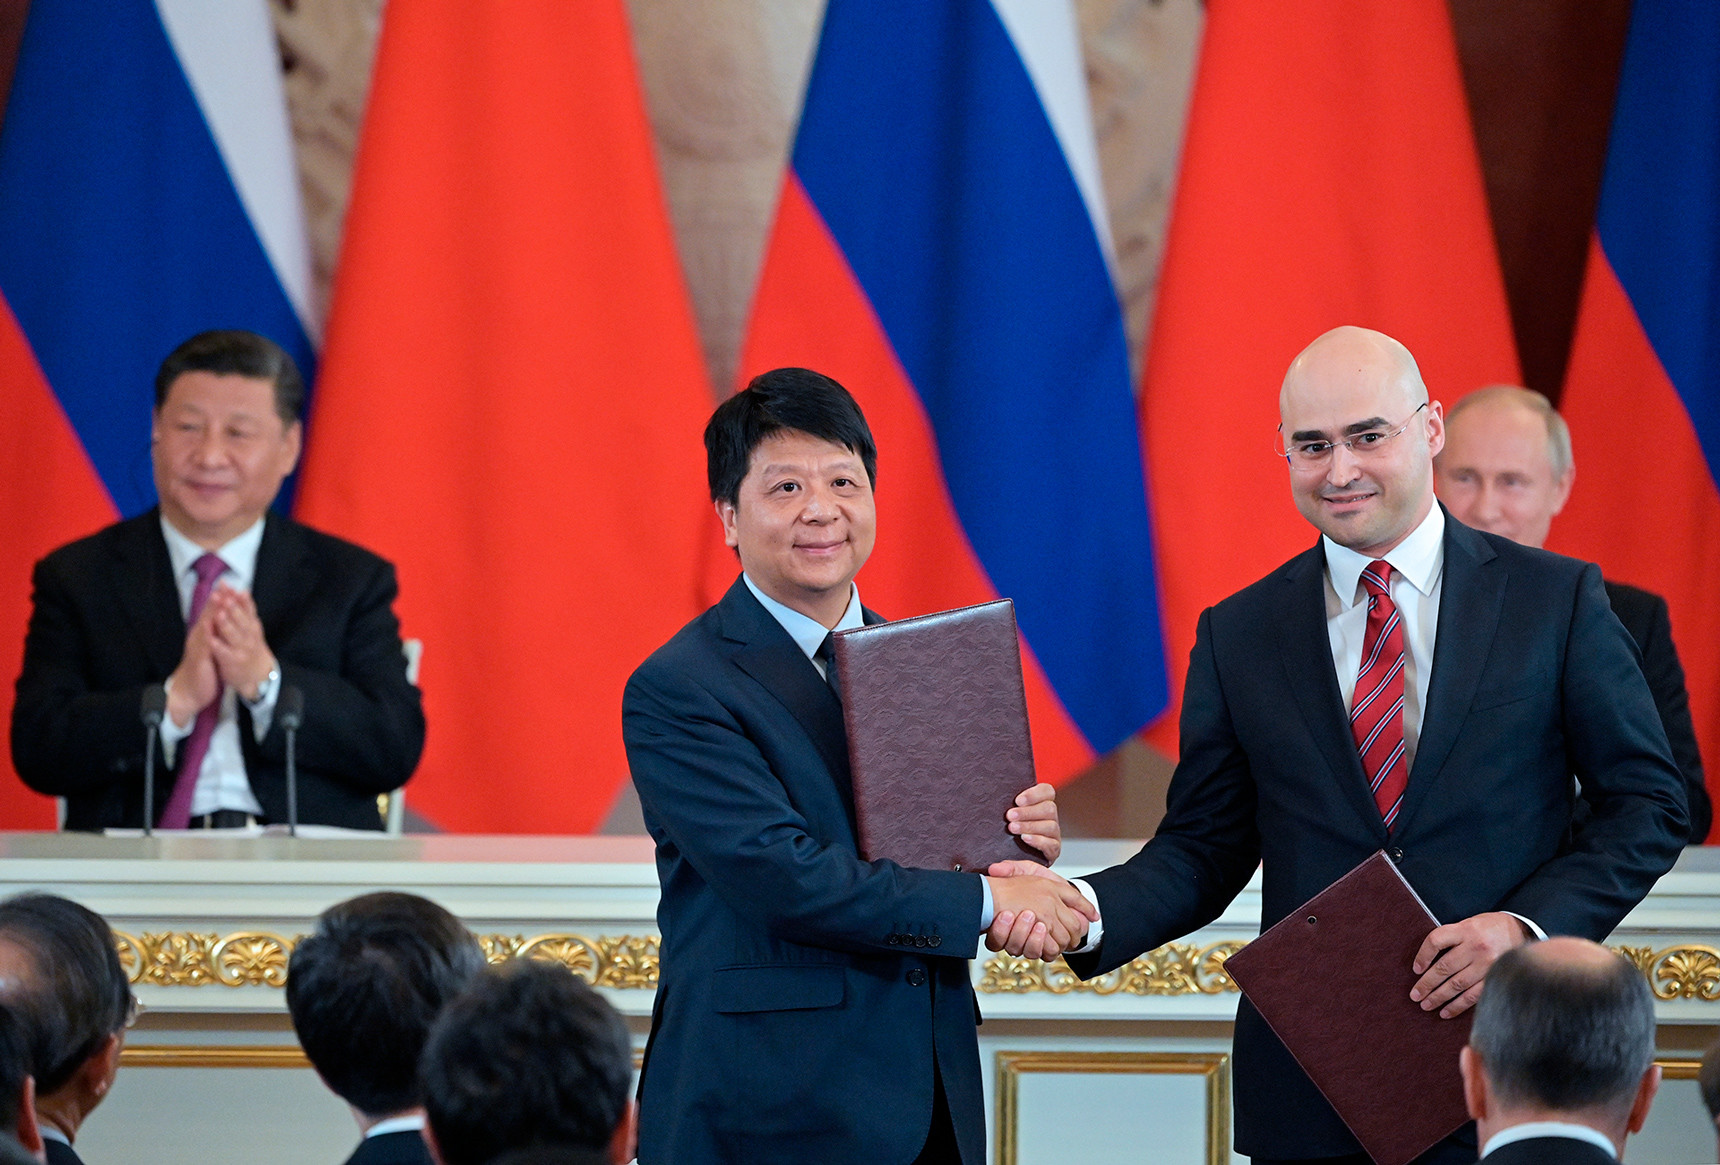 MTS PJSC President Alexey Kornya and Huawei CEO Guo Ping (right to left in the foreground) at the signing ceremony of joint documents on the results of Russian-Chinese negotiations